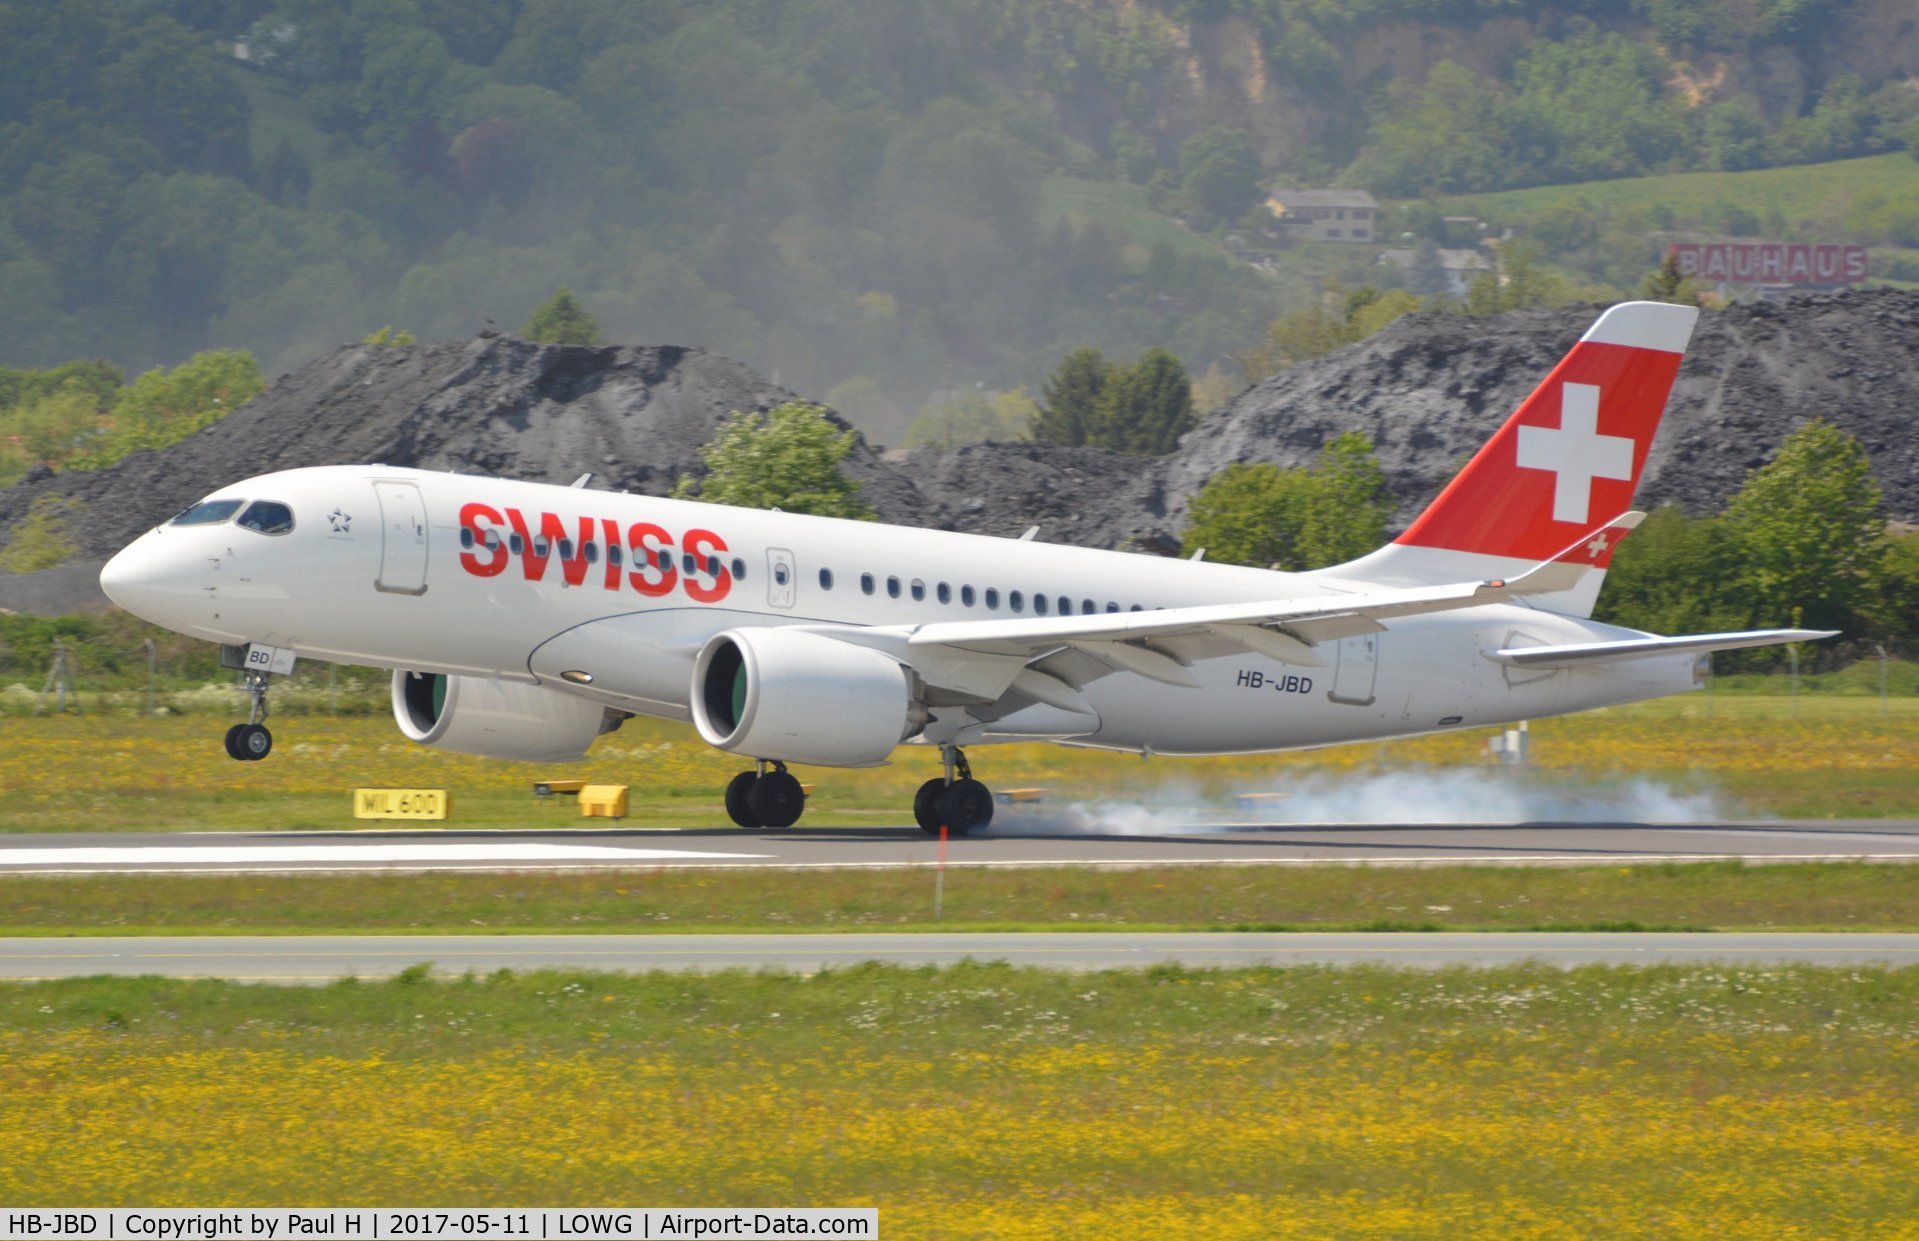 HB-JBD, 2016 Bombardier CSeries CS100 (BD-500-1A10) C/N 50013, CS100 from Swiss, performing a touch-and-go at LOWG. Pilot flight training